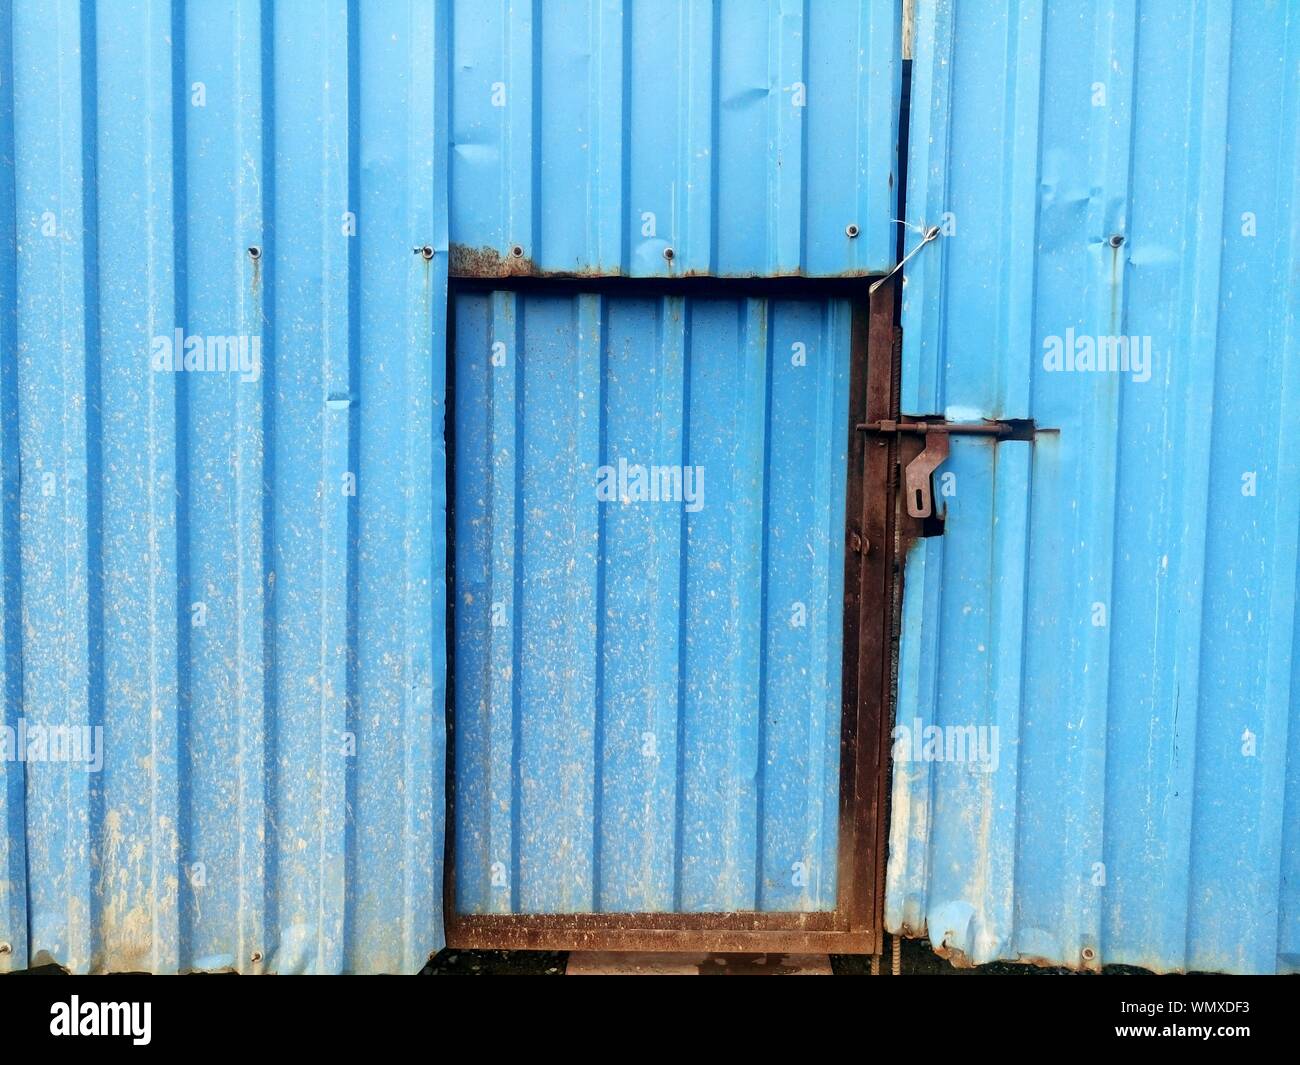 Corrugated Iron Door At Construction Site Stock Photo